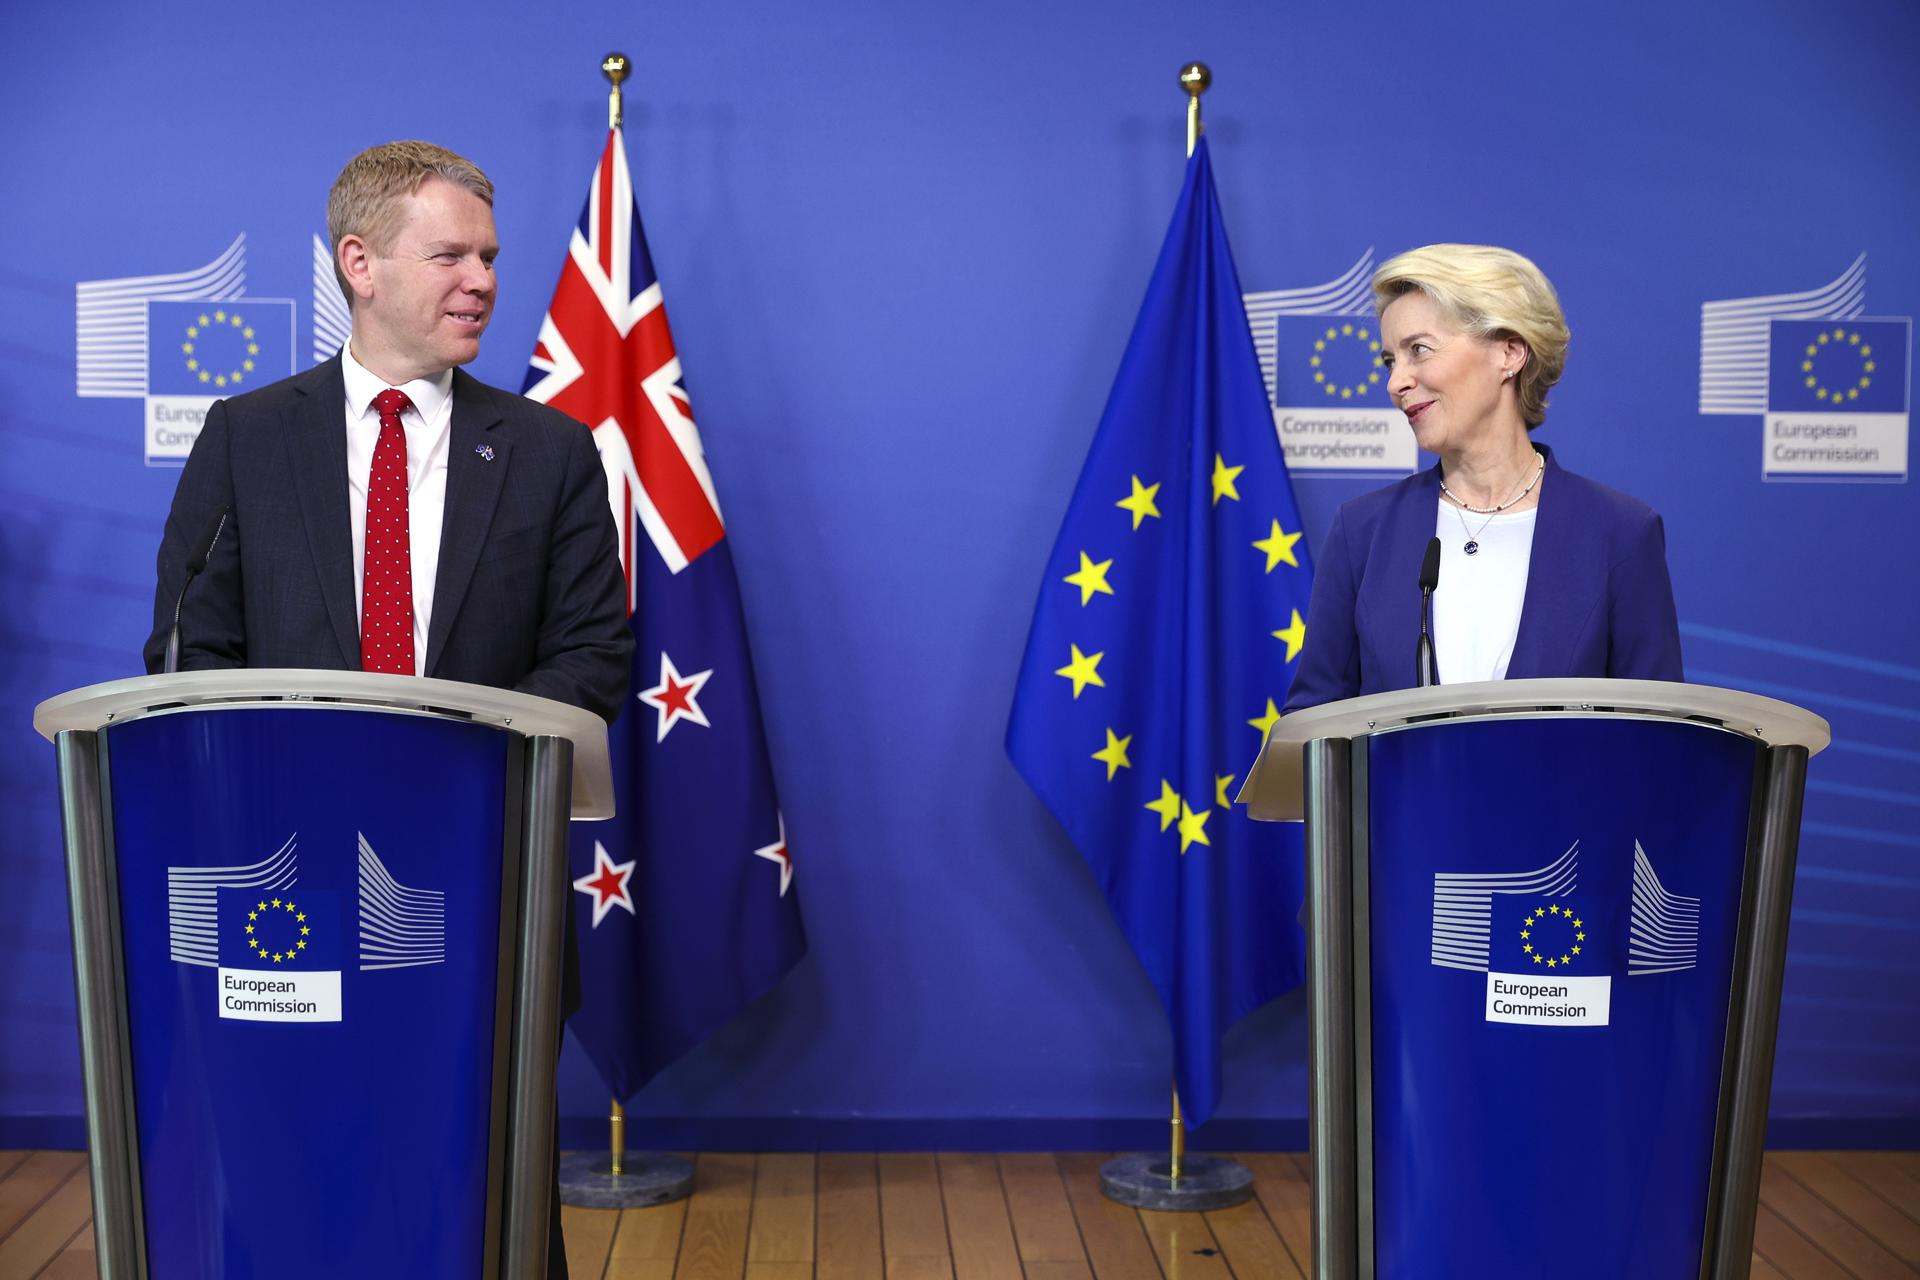 New Zealand Prime Minister Chris Hipkins (L) and European Commission President Ursula von der Leyen (R) attend the signing ceremony of the EU-New Zealand Free Trade Agreement, at the European Commission in Brussels, Belgium, 09 July 2023. EFE-EPA/JULIEN WARNAND